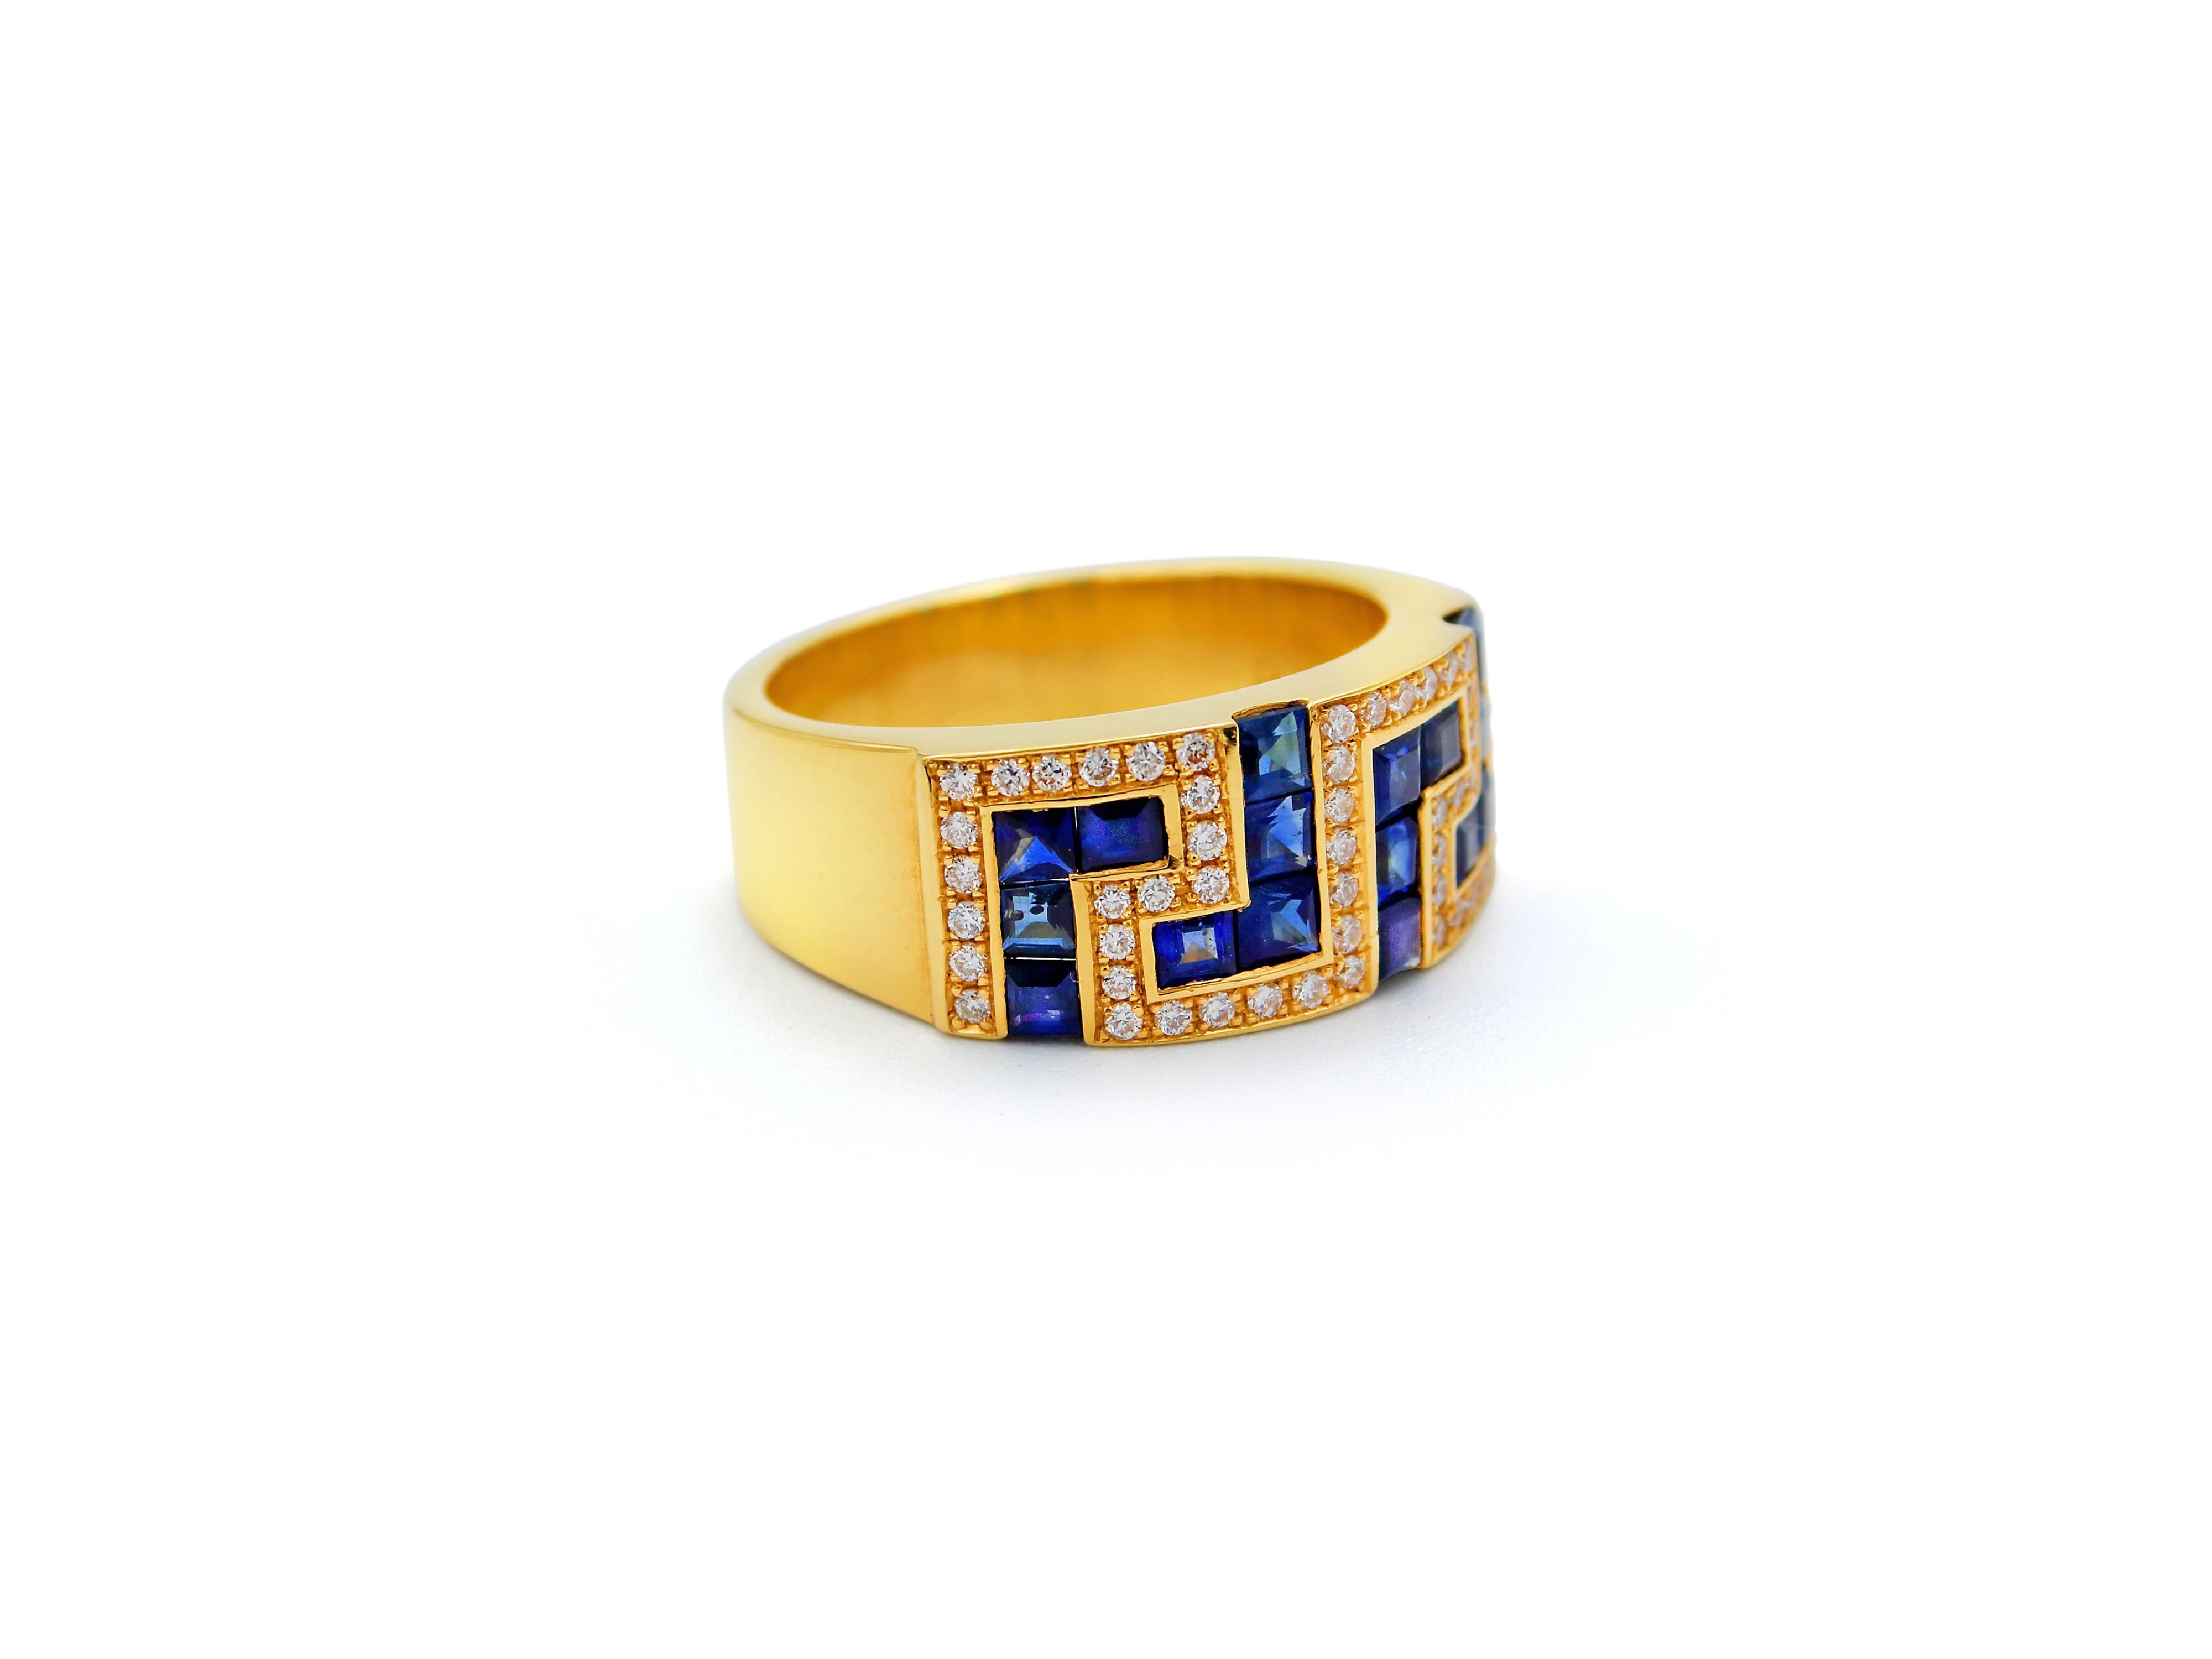 Greek key band ring in 18 karats yellow gold Greek Key set it with 1.70 carats of blue Sapphires. The frame around it is the pave setting of 0.40 carats natural Diamonds that adds light and luxury to the piece. Greek key design is one of the most